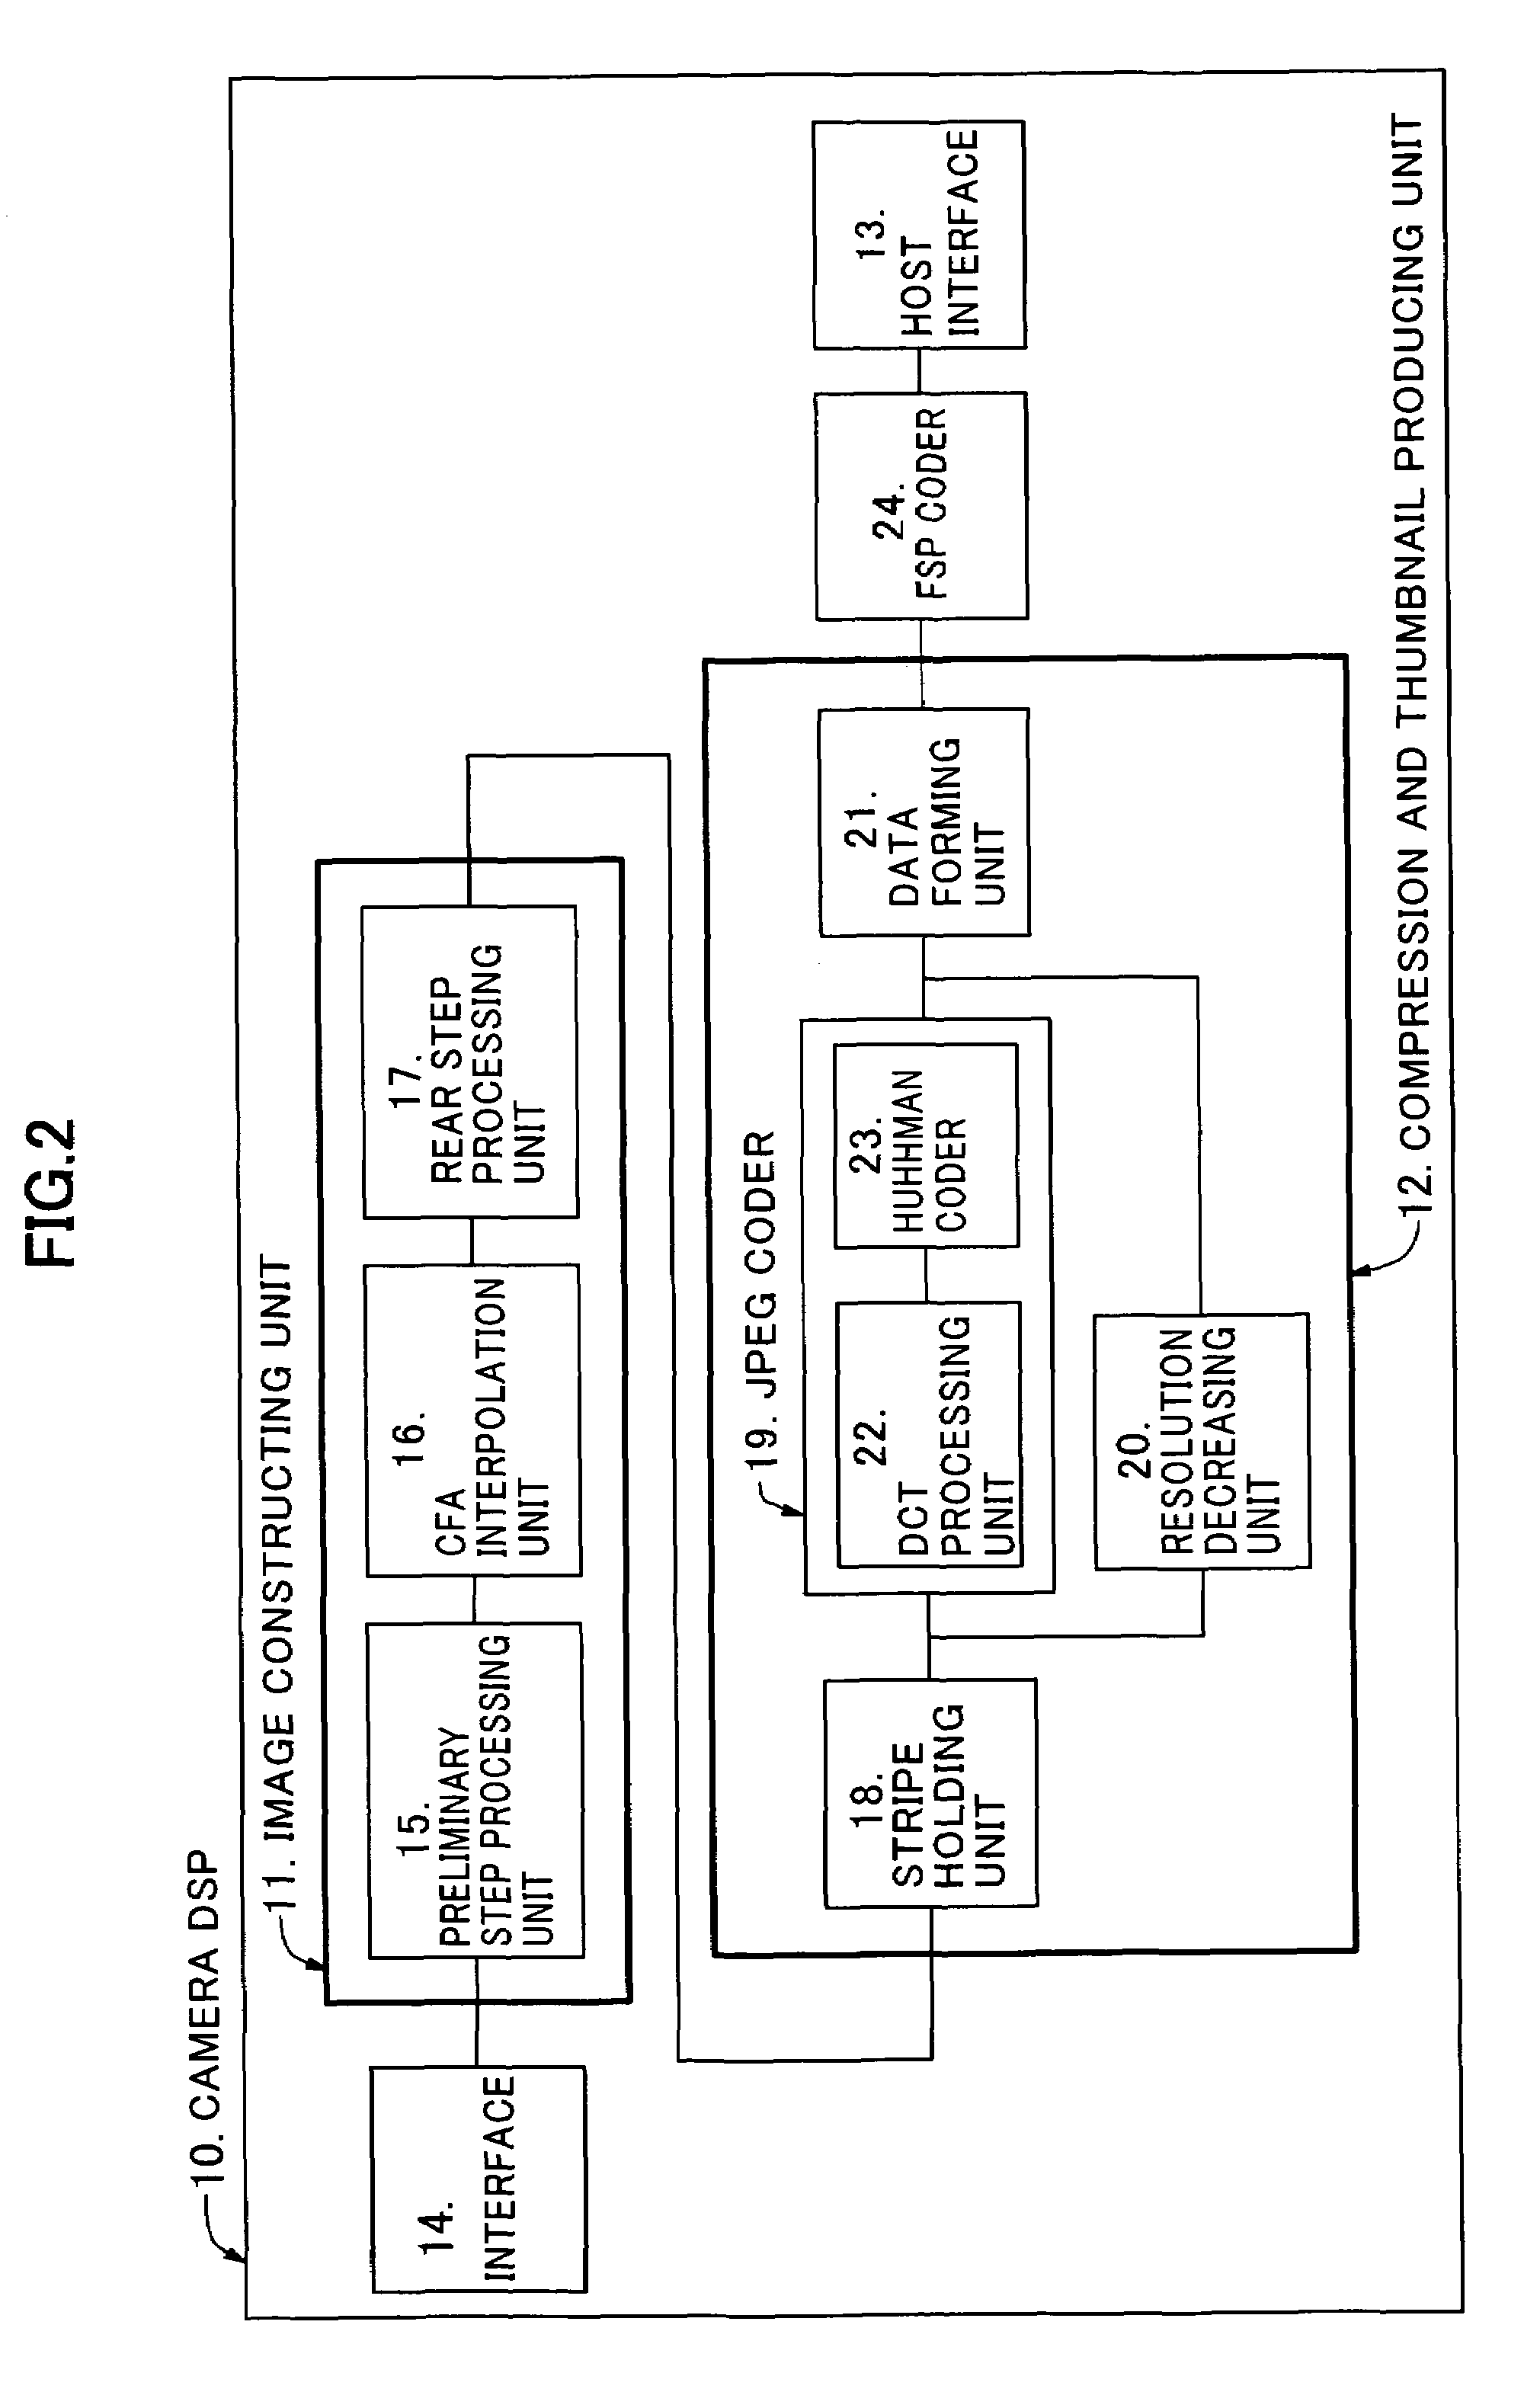 Electronic device for compressing image data and producing thumbnail image, image processing apparatus, and data structure